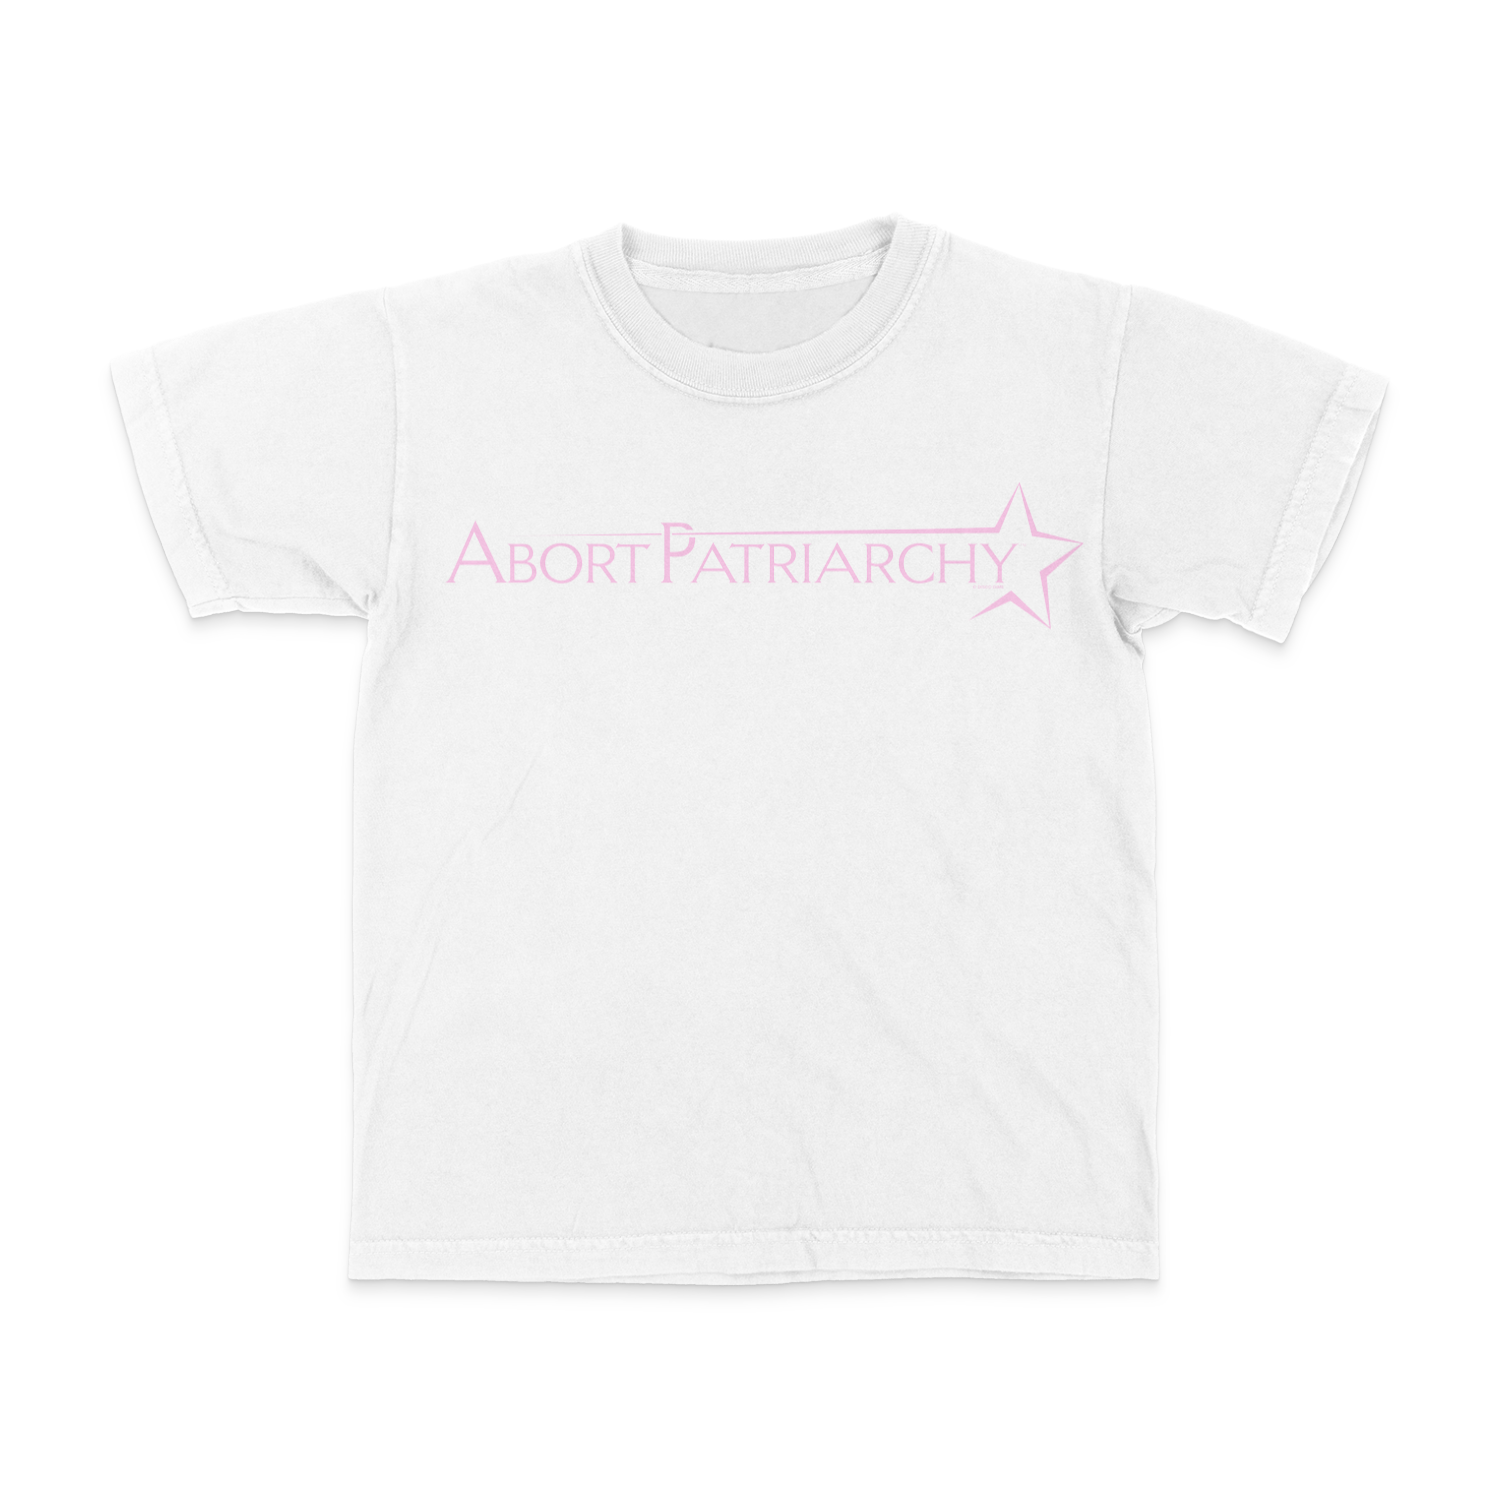 Abort Patriarchy Baby Tee (Pink/White)